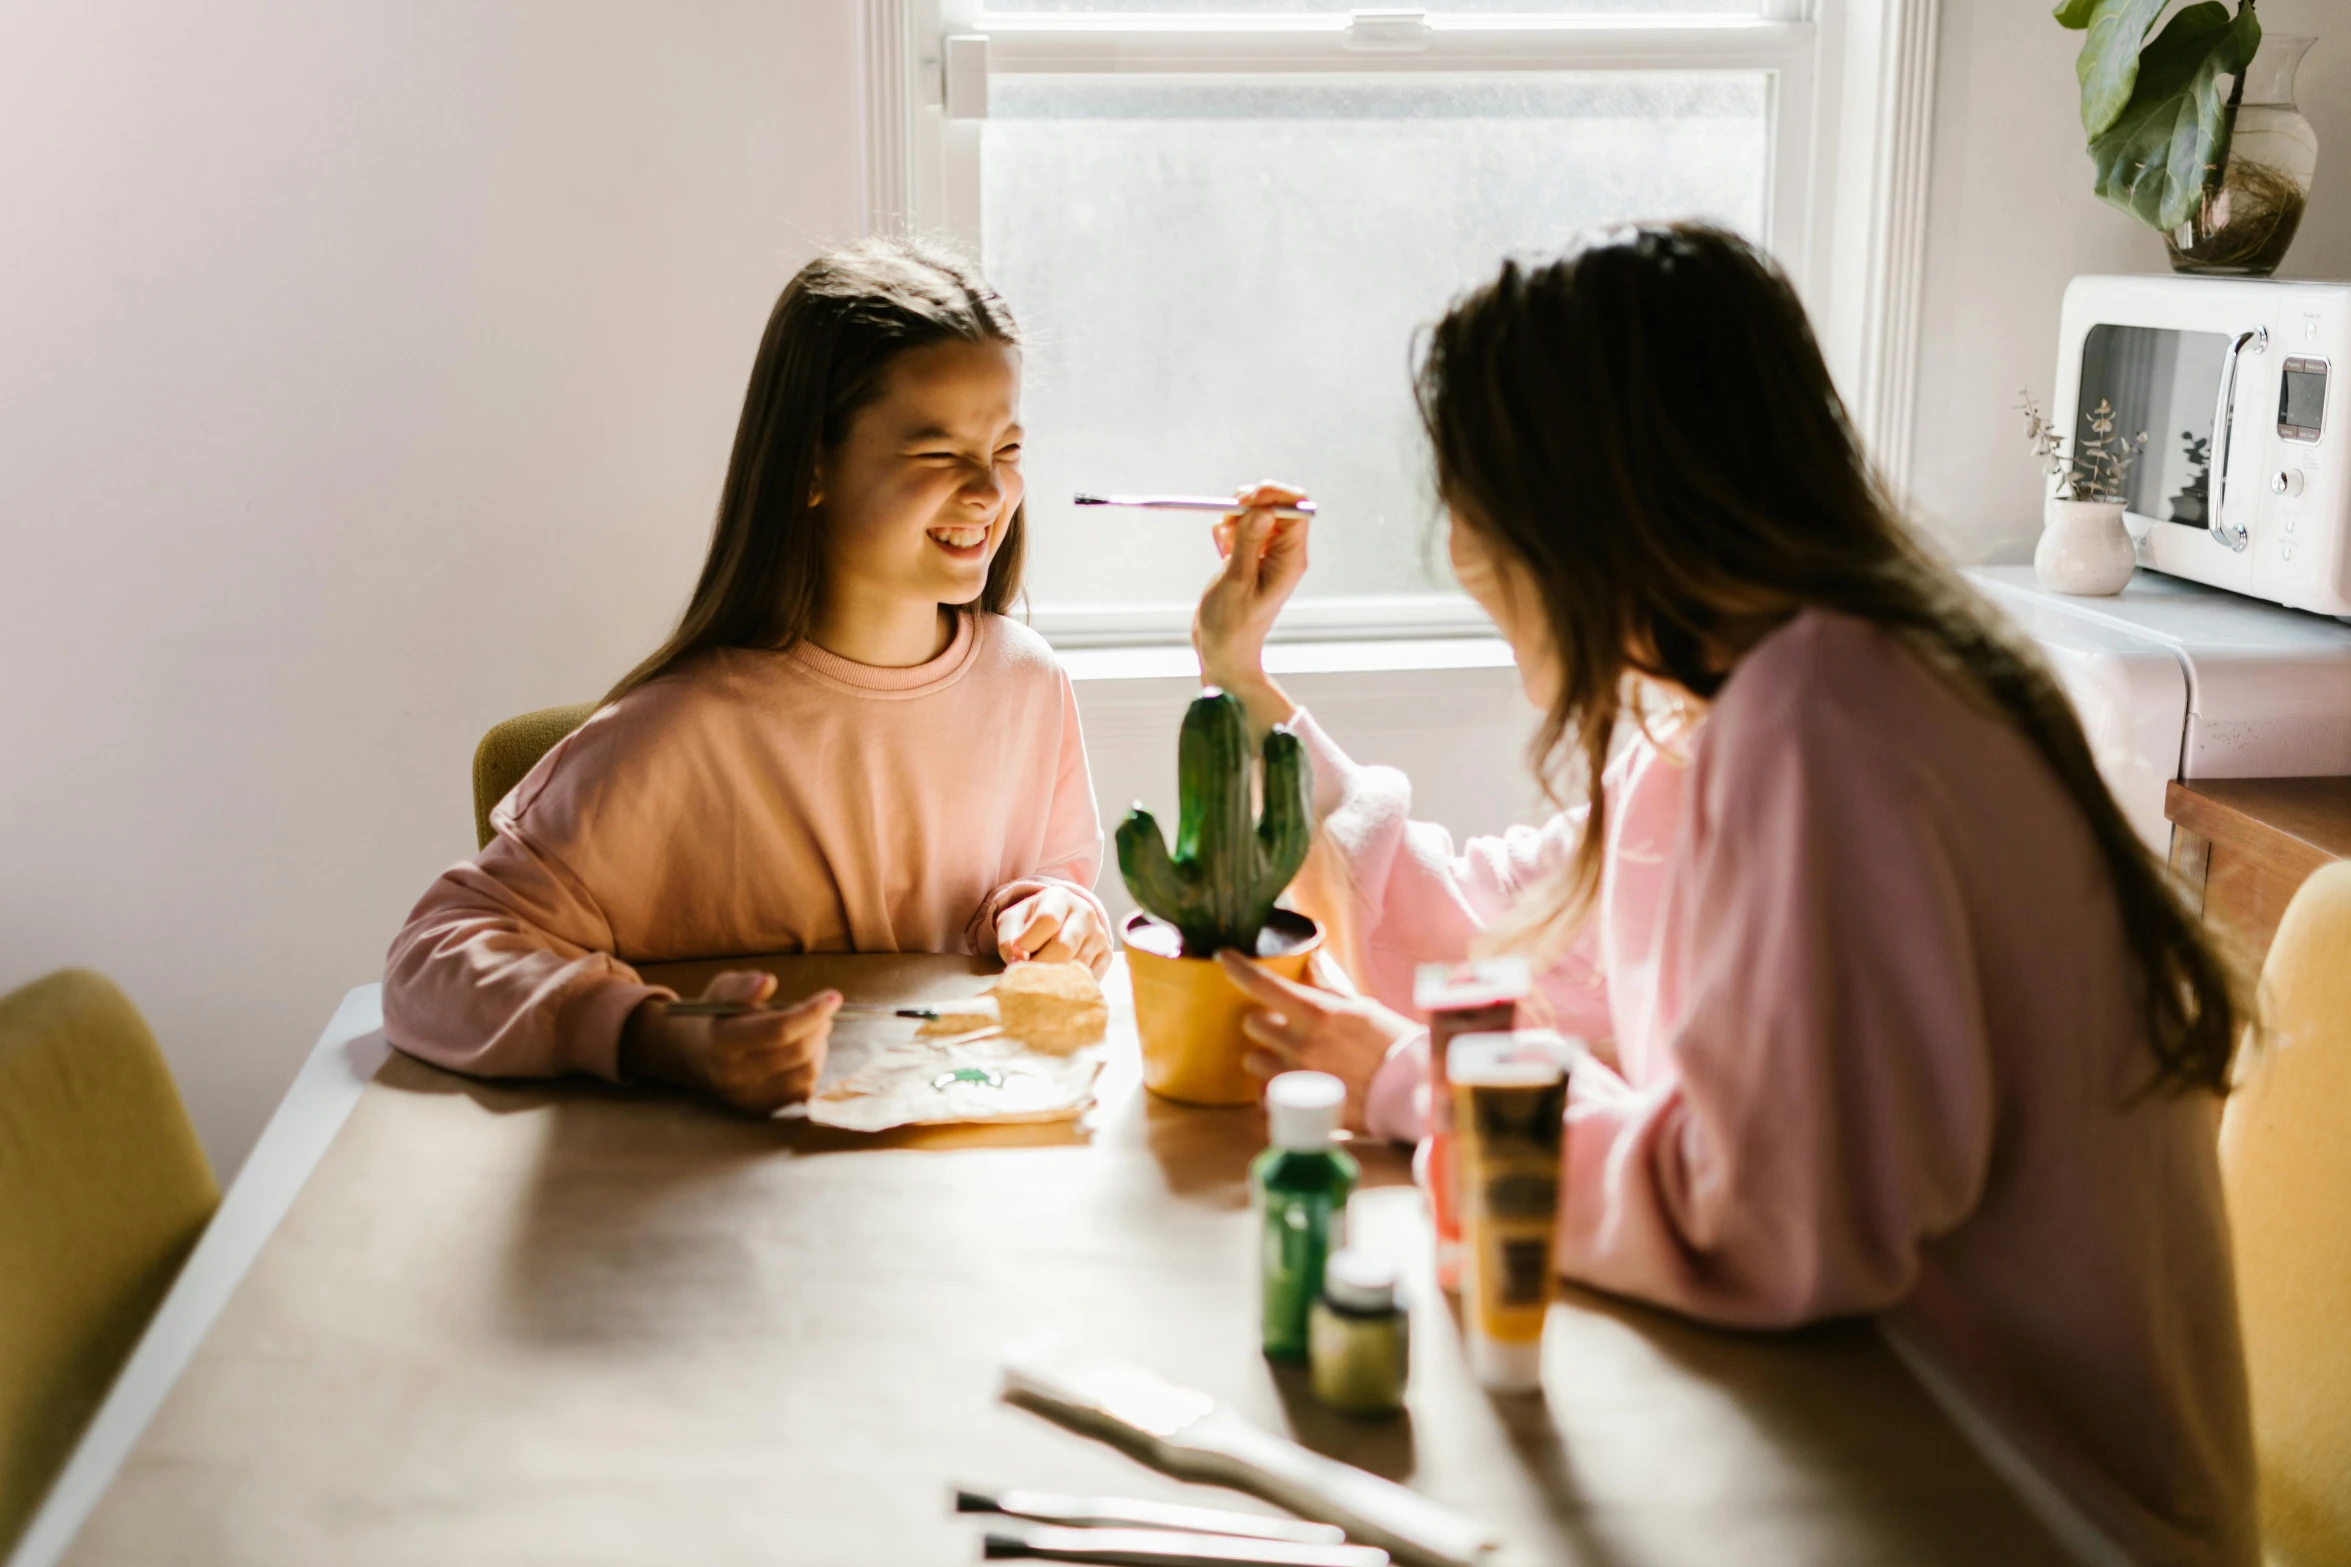 two girls sitting at a table eating food, pexels contest winner, process art, with cactus plants in the room, holding a paintbrush, sitting on a mocha-colored table, family friendly